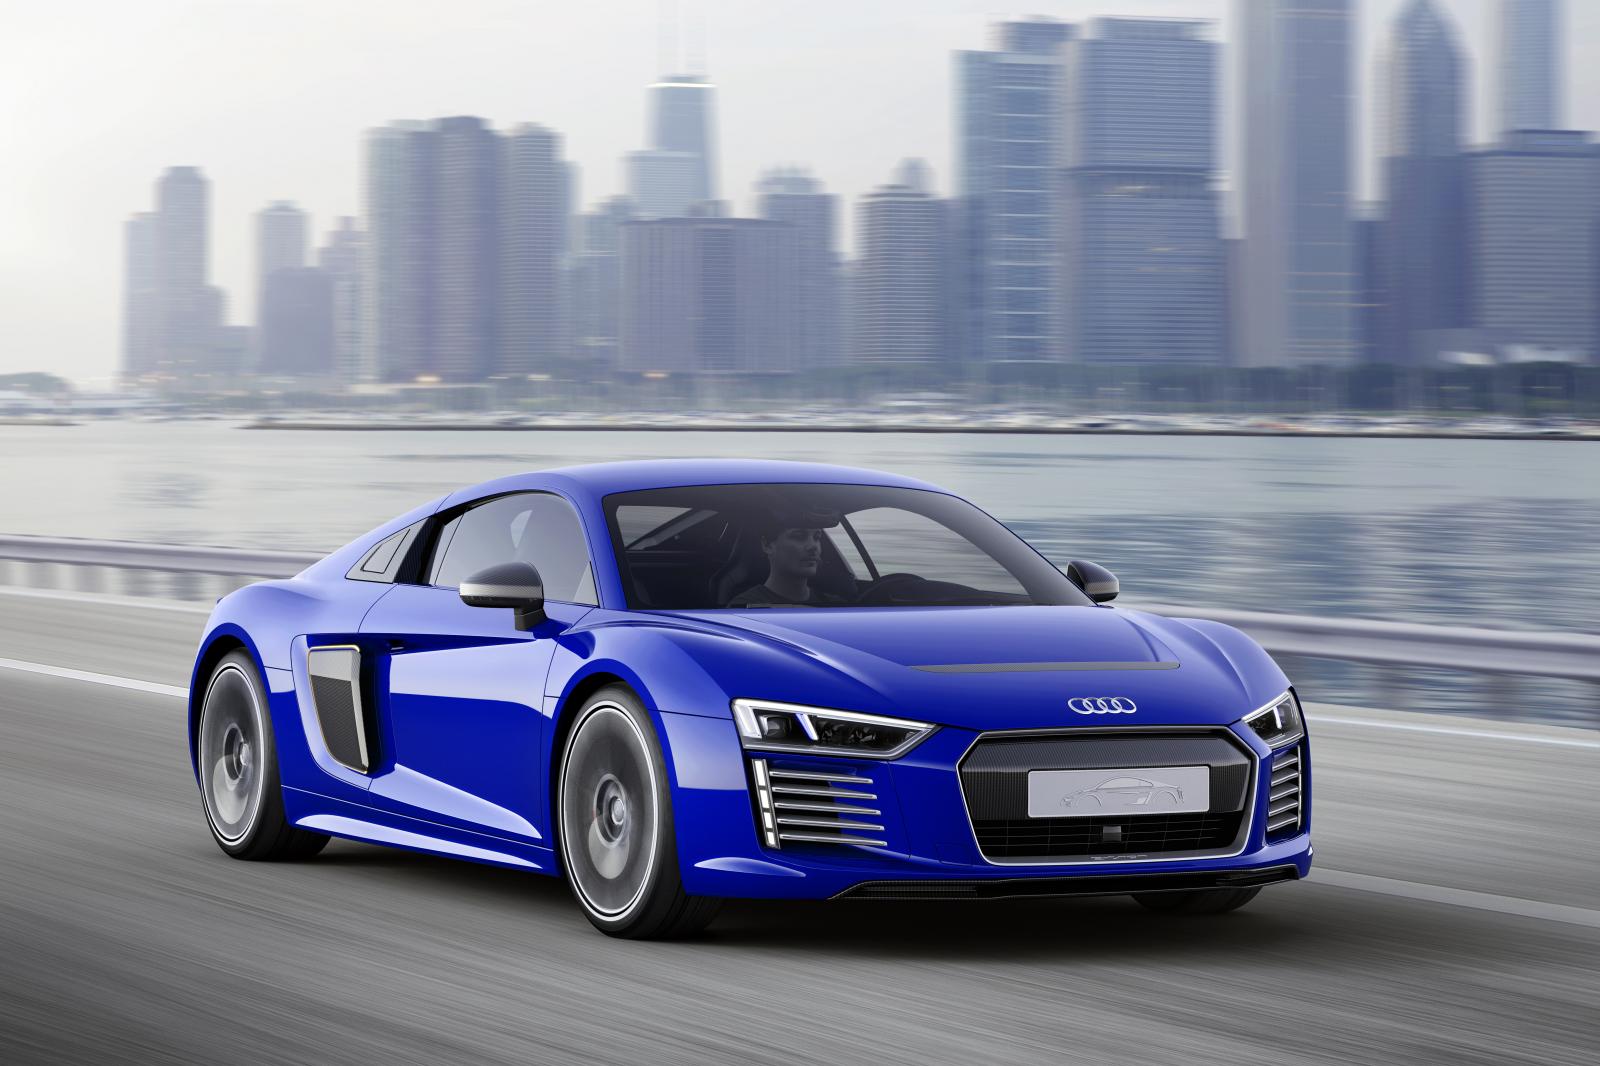 Audi onthult R8 e-tron piloted driving concept